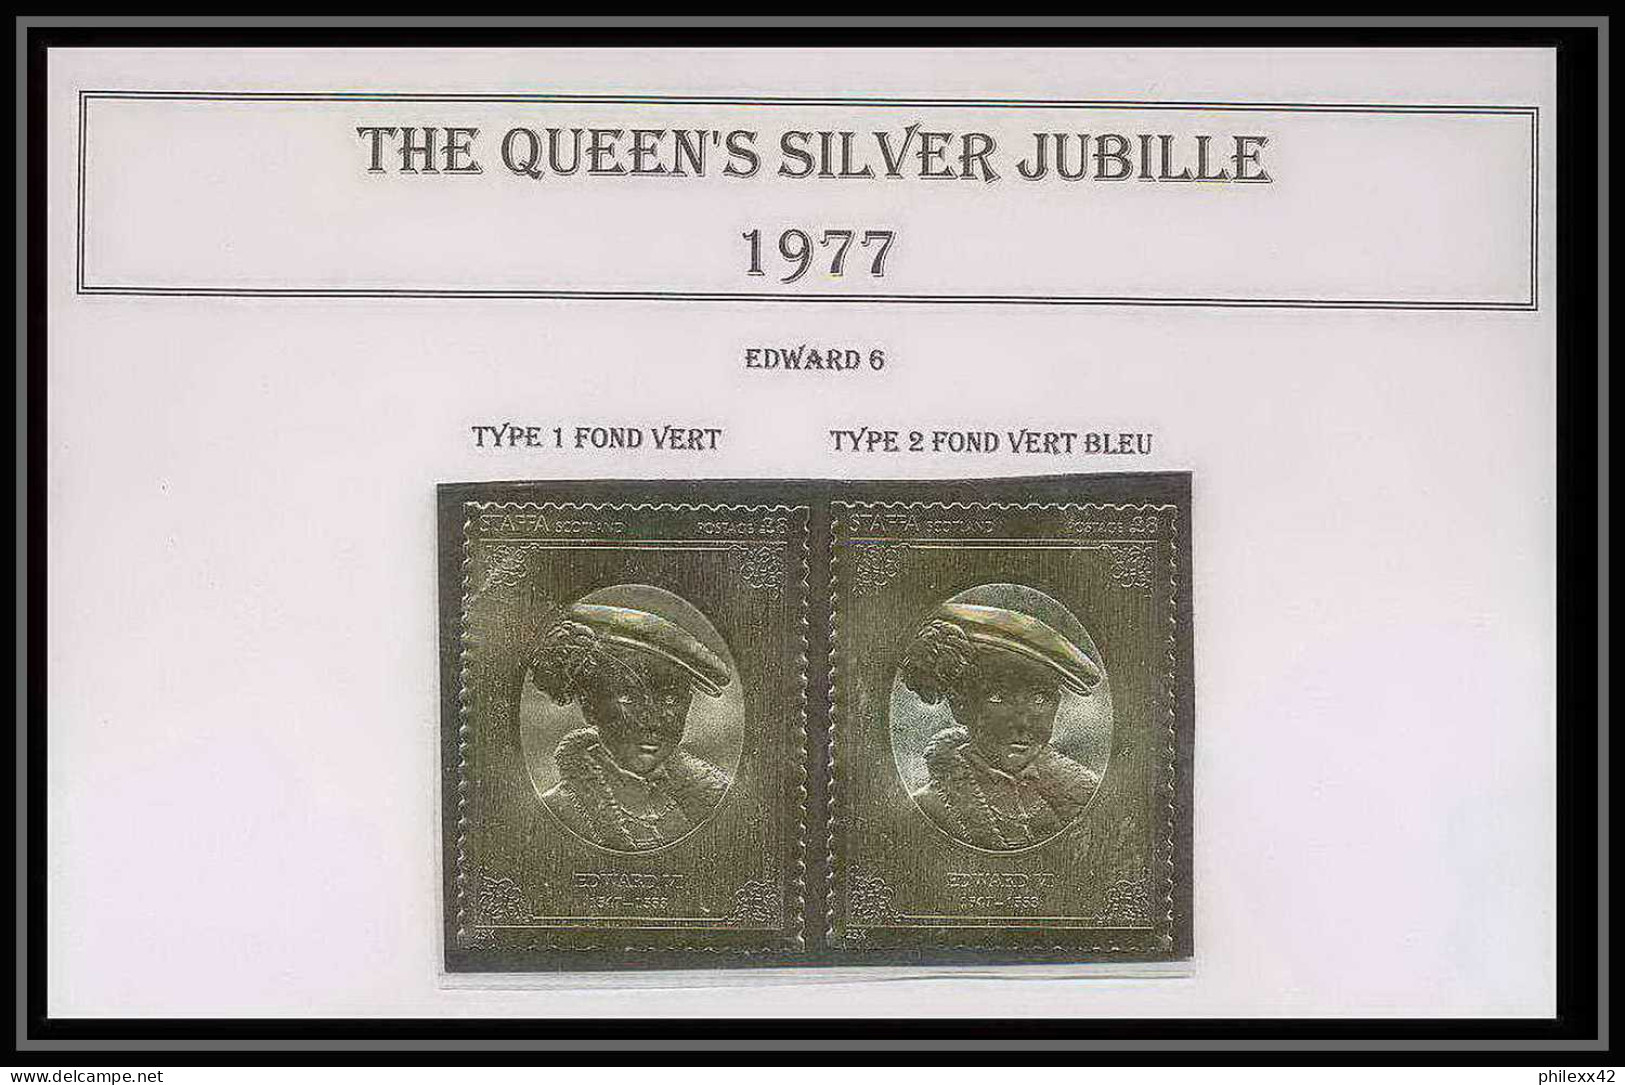 460 Staffa Scotland The Queen's Silver Jubilee 1977 OR Gold Stamps Monarchy United Kingdom Edward 6 Type 1&2 Neuf** Mnh - Emissions Locales